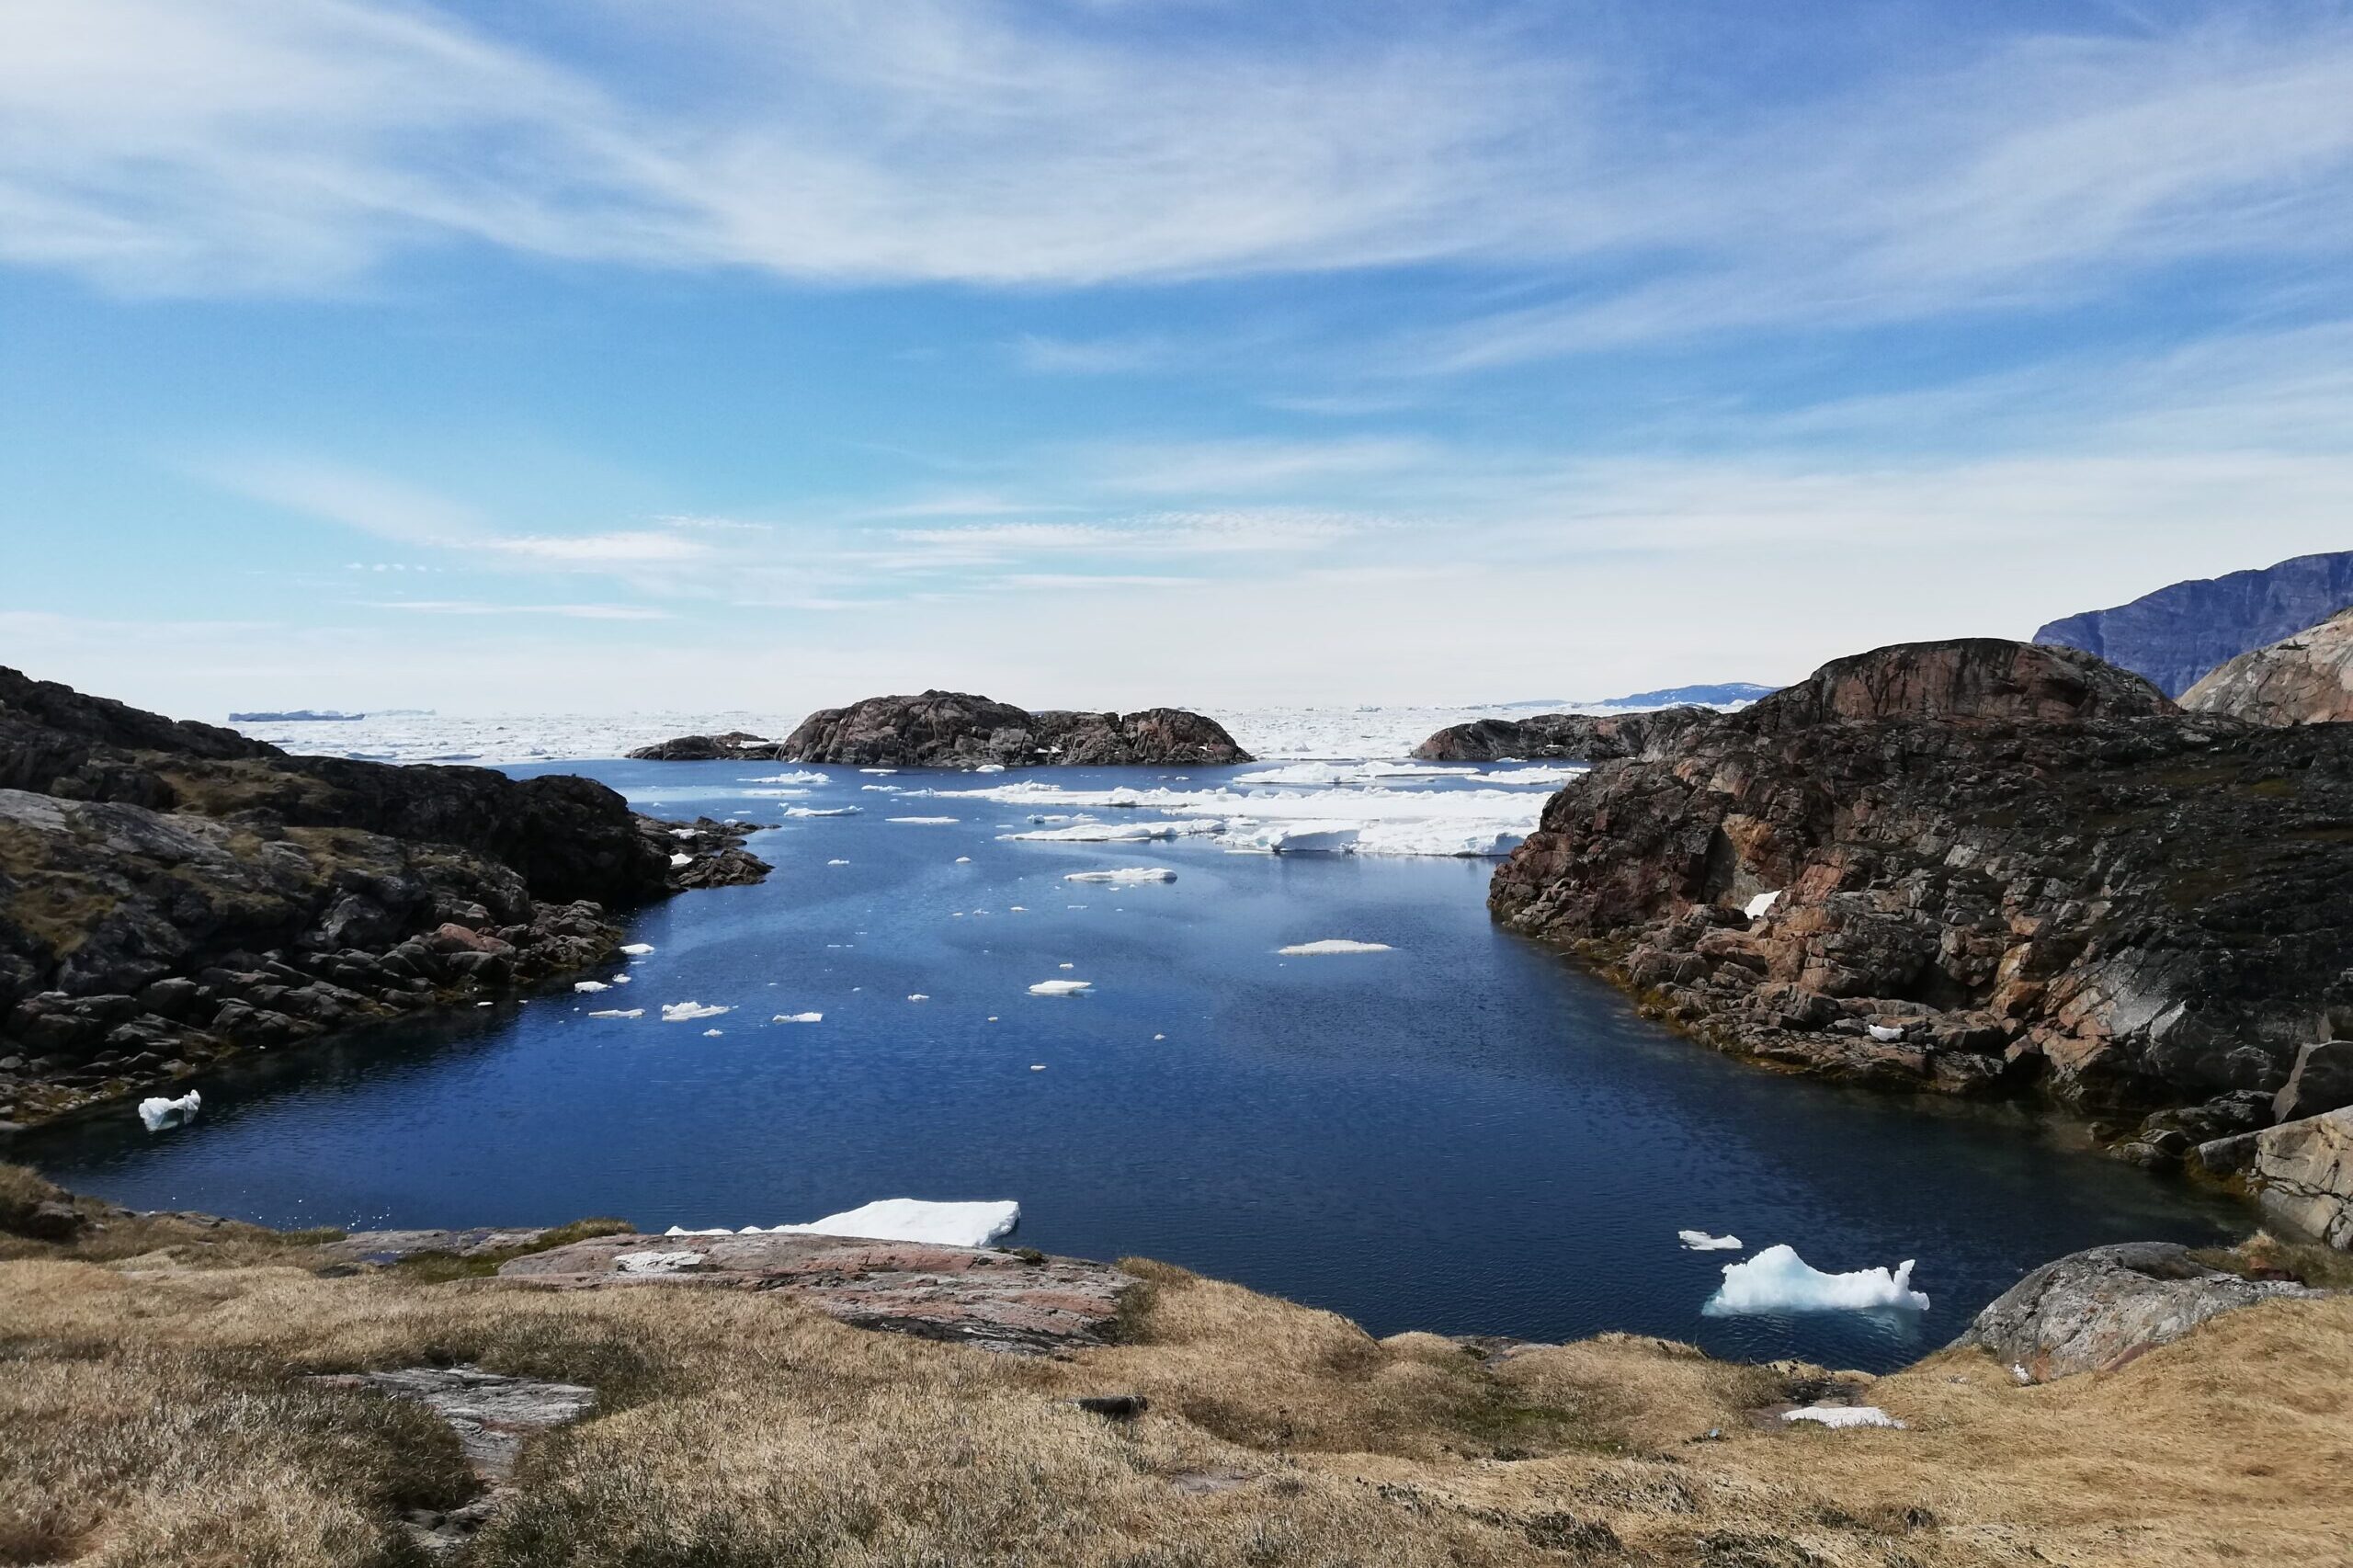 View to Sermilik Fjord from Ikateq. Photo by Anna Burdenski - Visit East Greenland